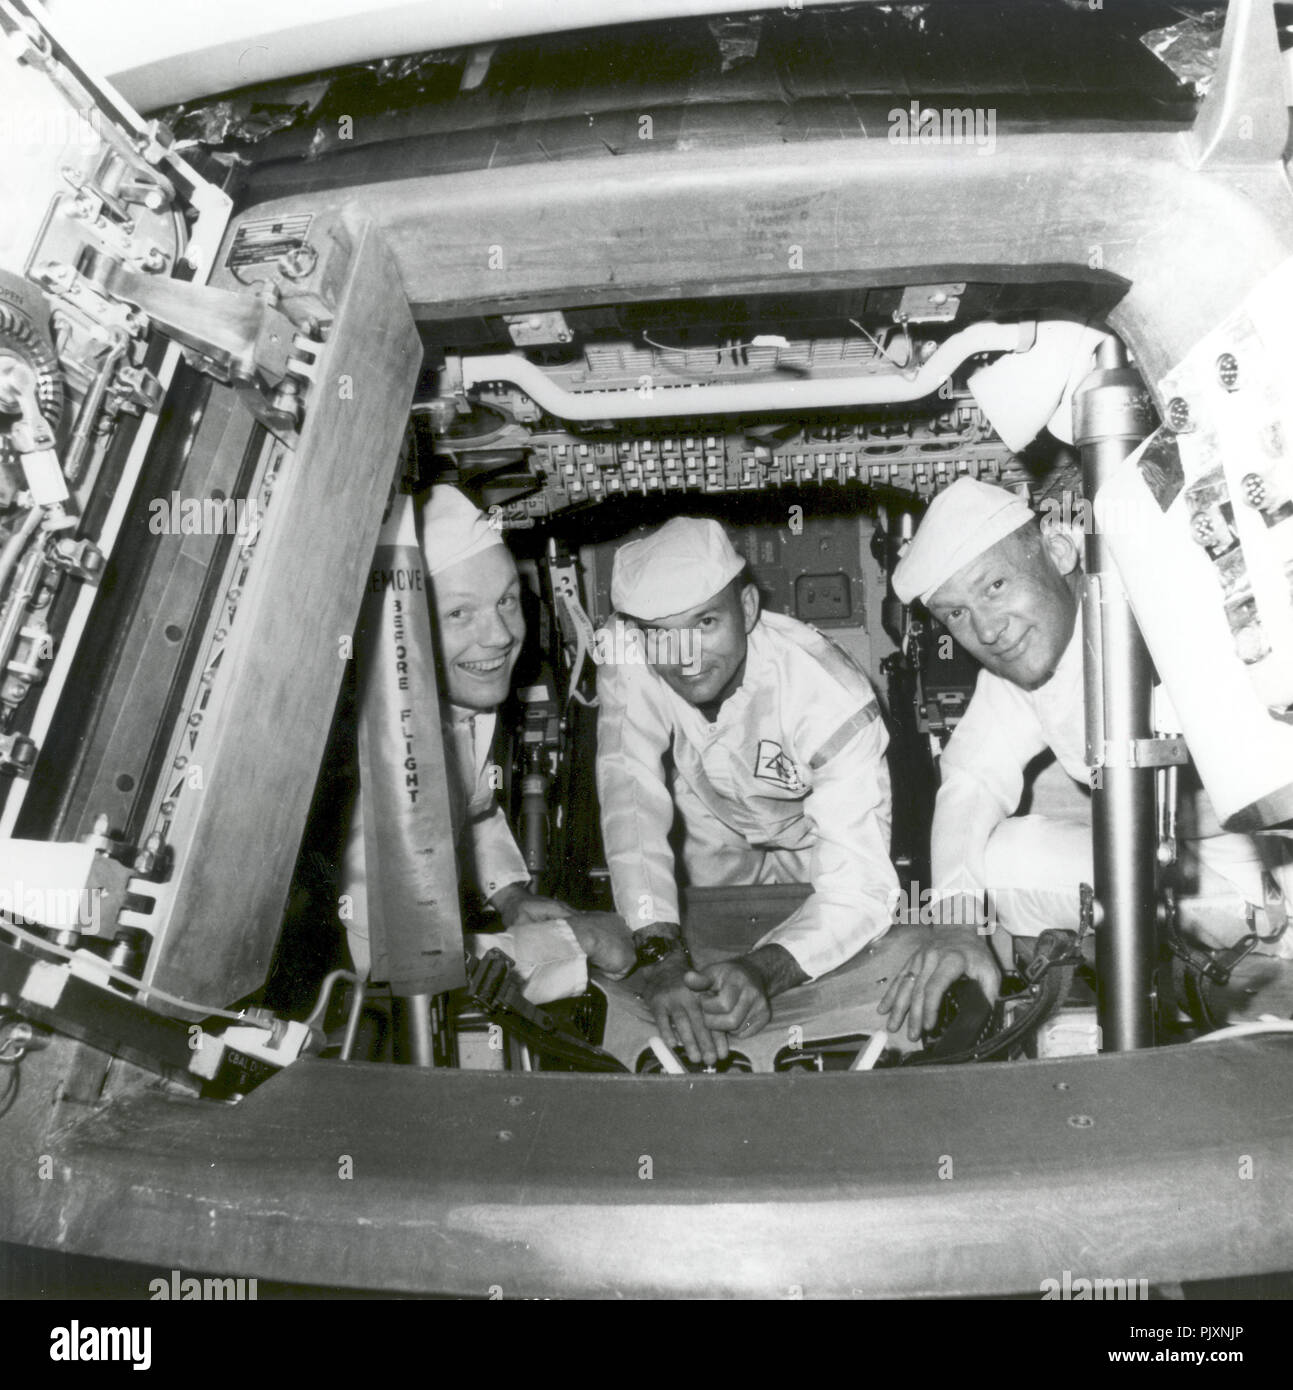 Cape Canaveral, FL - (FILE) -- The Apollo 11 crew conducting a crew compartment fit and functional check, of the equipment and storage locations, in their command module on June 10, 1969. Peering from the hatch are from left, Neil Armstrong, commander; Michael Collins, command module pilot; and Buzz Aldrin, lunar module pilot. Armstrong and Aldrin later conducted a similar check aboard the lunar module, which carried them down to the lunar surface on July 20, 1969. Credit: NASA via CNP /MediaPunch Stock Photo